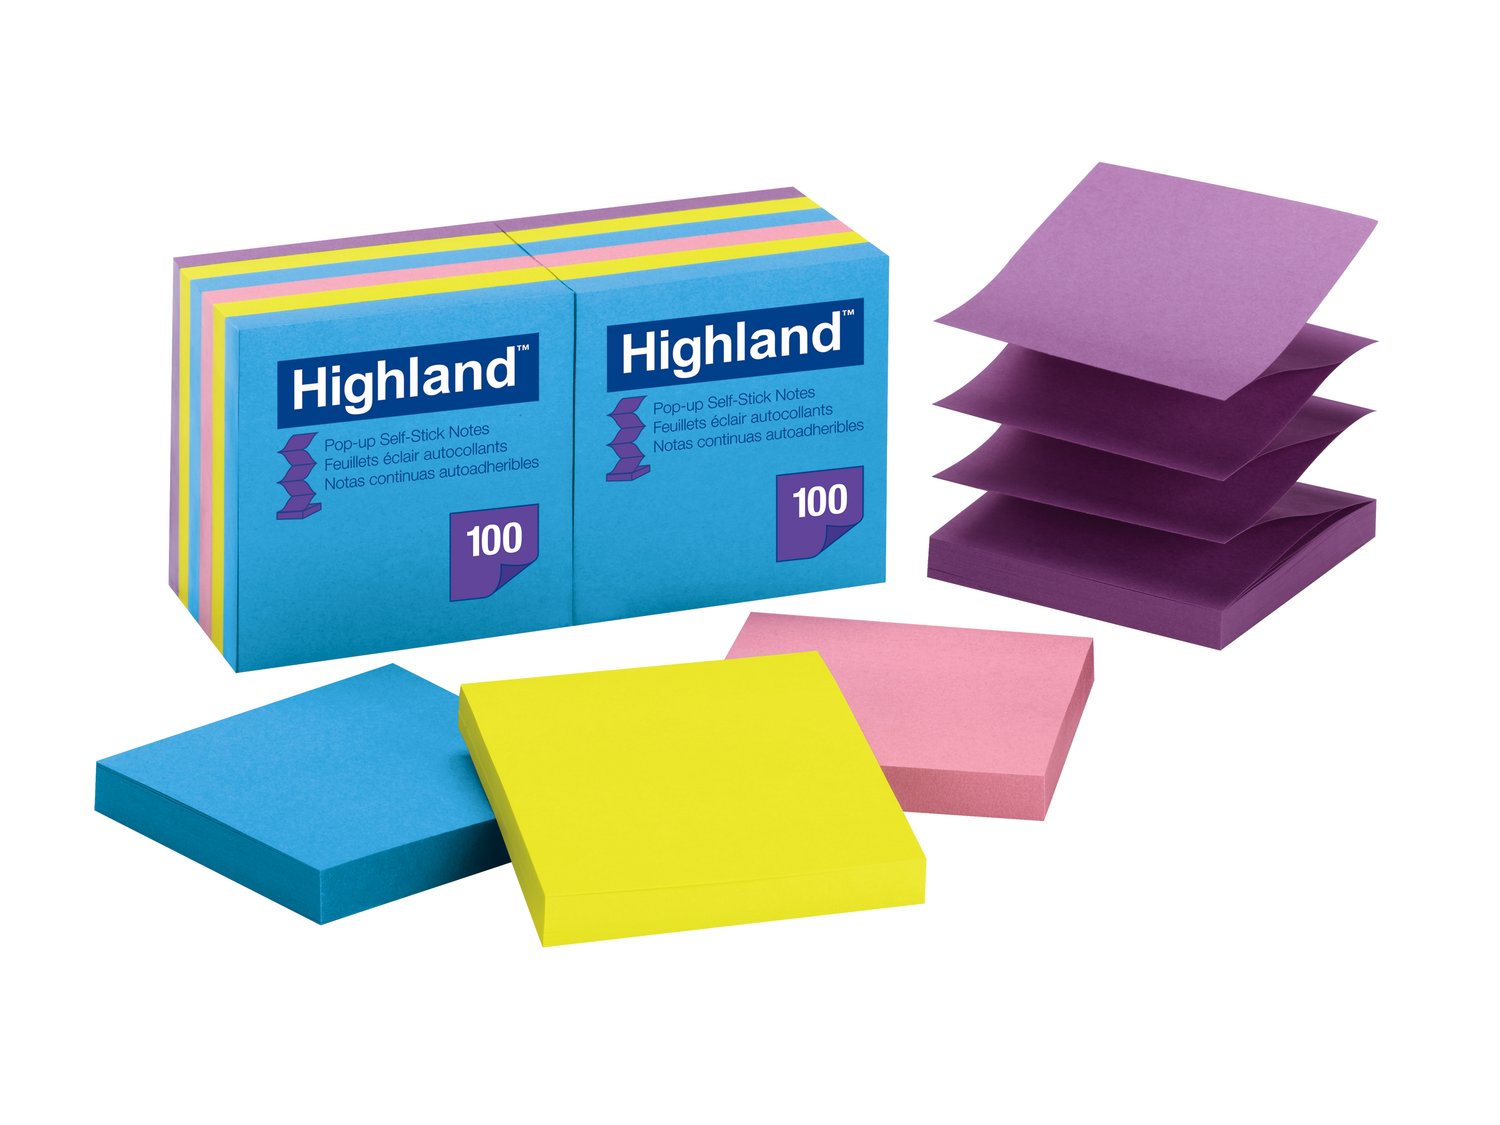 7100211855 - Highland Pop-up Self Stick Notes 6549-PuB, 3 in x 3 in